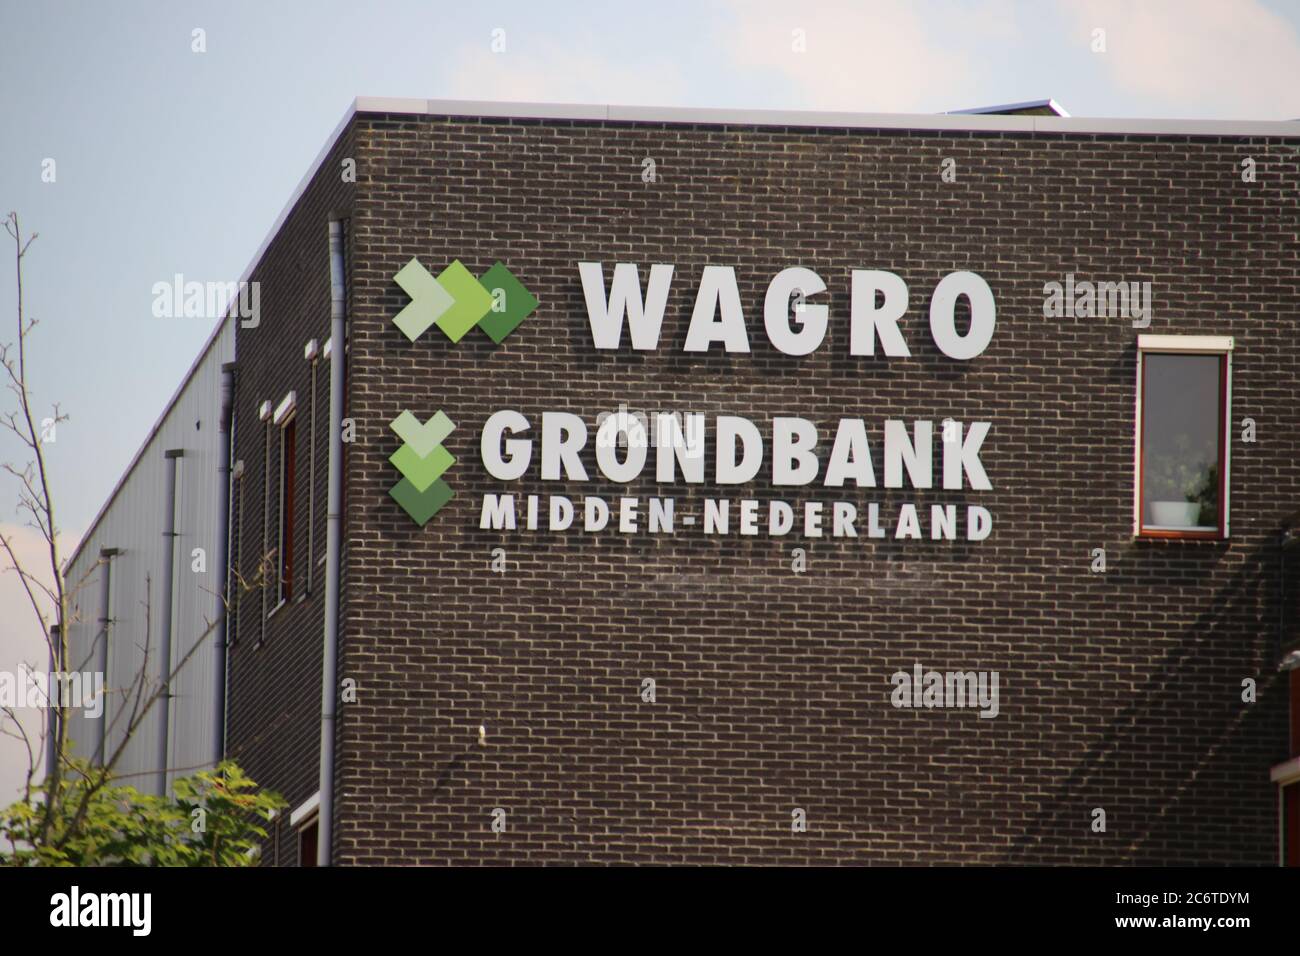 Wagro Land Bank midden Holland in Waddinxveen for buying and selling ground Stock Photo